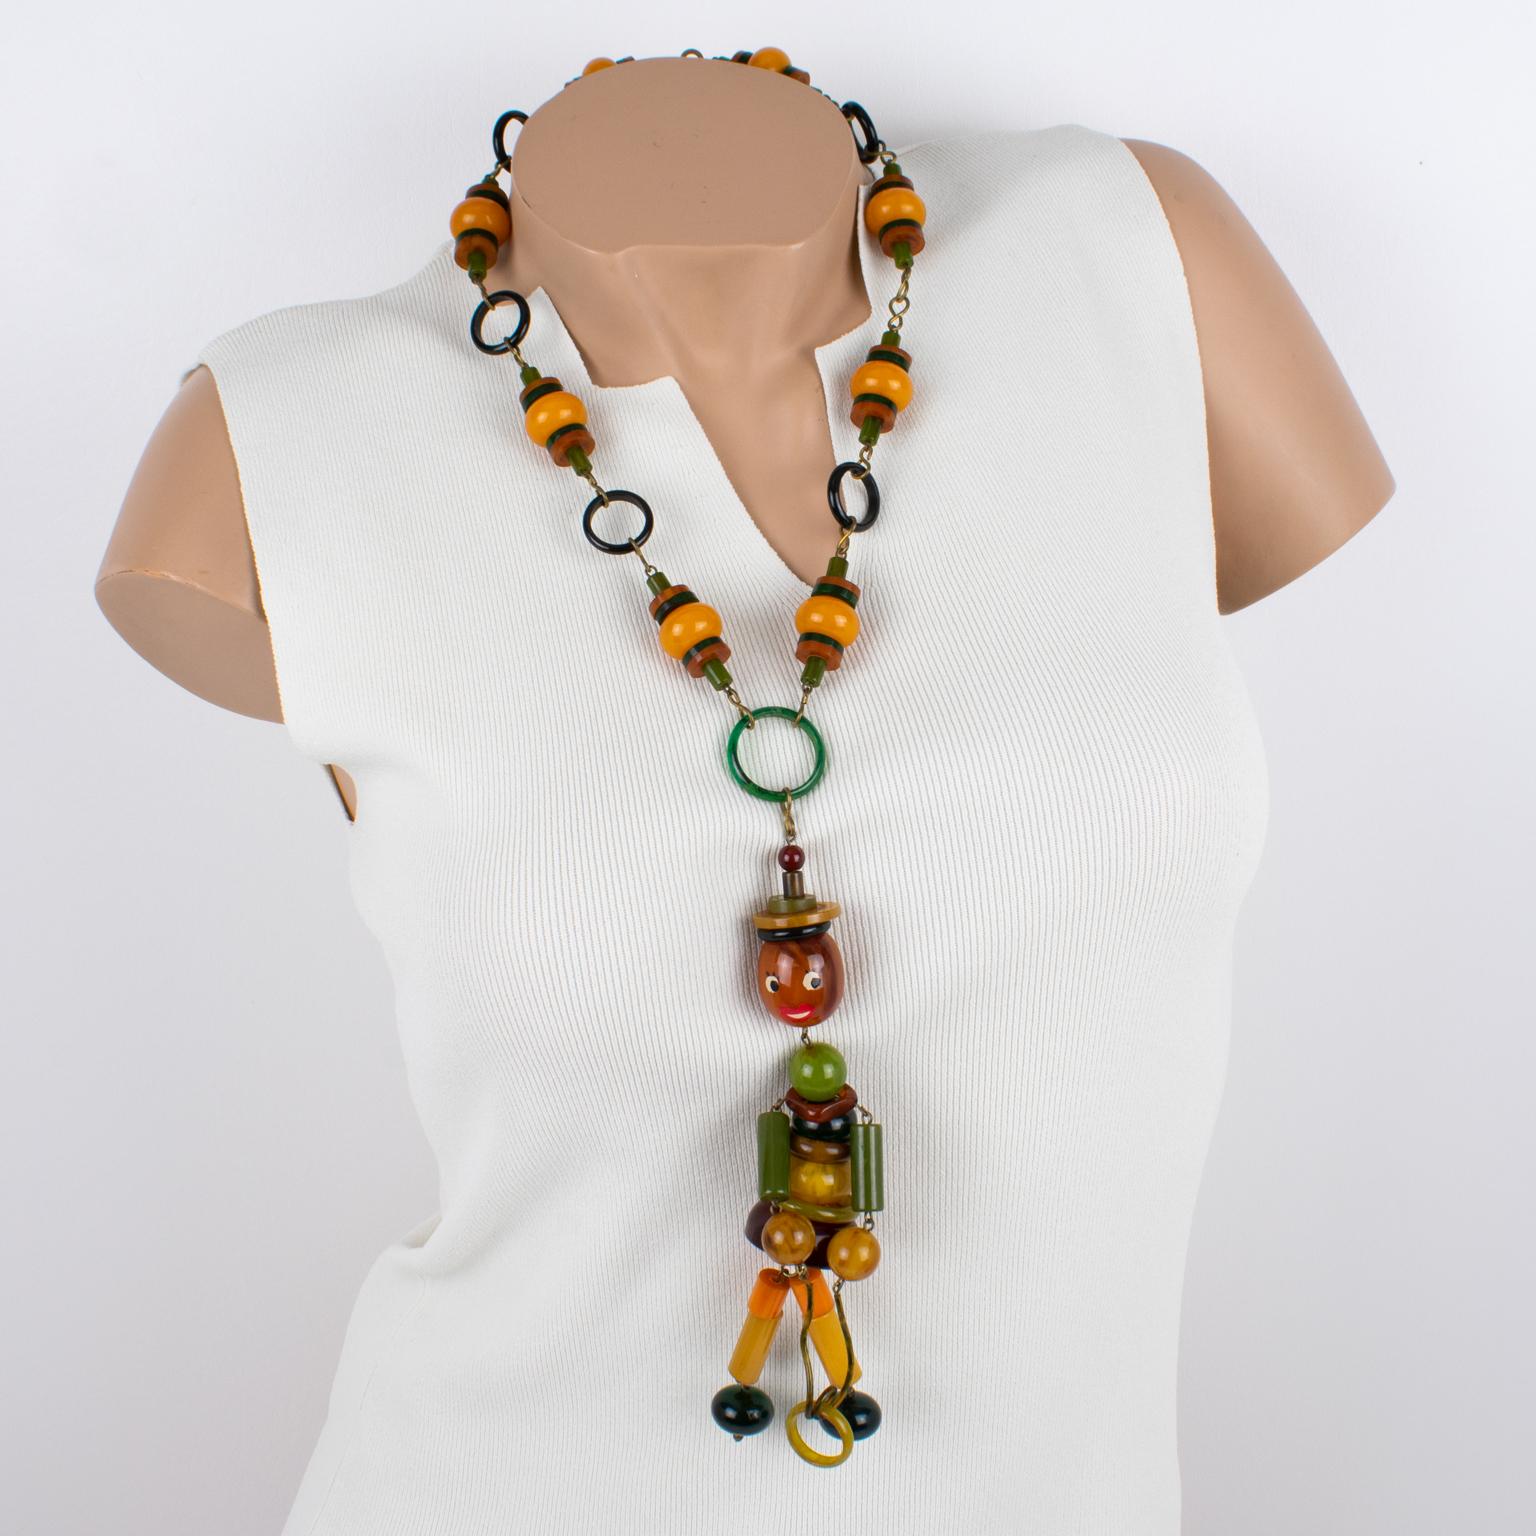 This stunning rare Bakelite long necklace was hand-crafted in France in the 1940s. The piece features a beaded design with an articulated crib toy doll pendant. The beaded necklace boasts autumnal colors with a lovely, warm palette of yellow